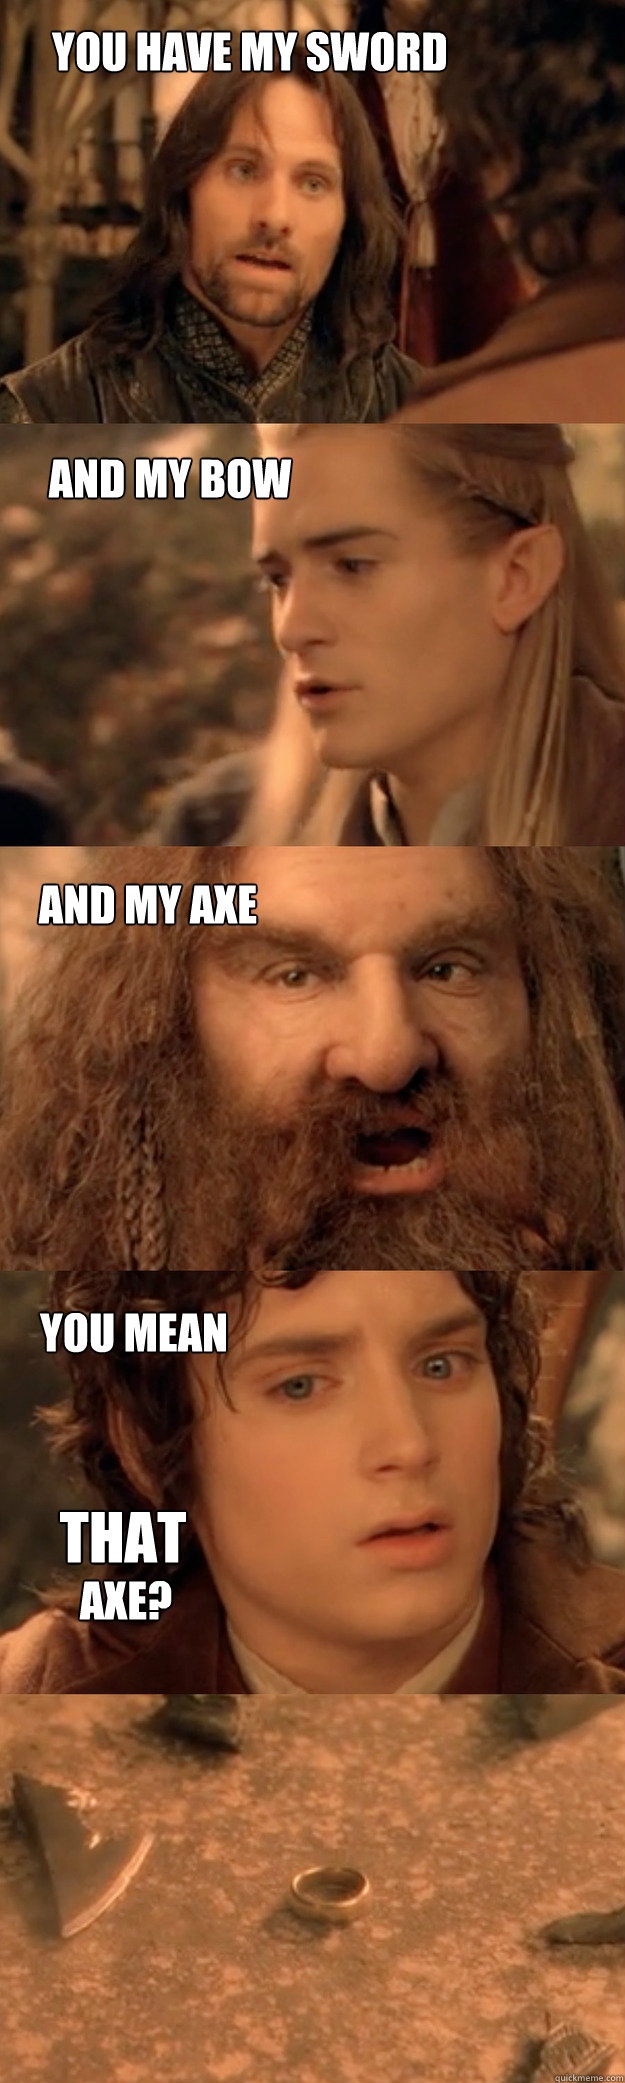 You have my sword And my bow And my axe You mean THAT Axe? - You have my sword And my bow And my axe You mean THAT Axe?  Scumbag Gimli